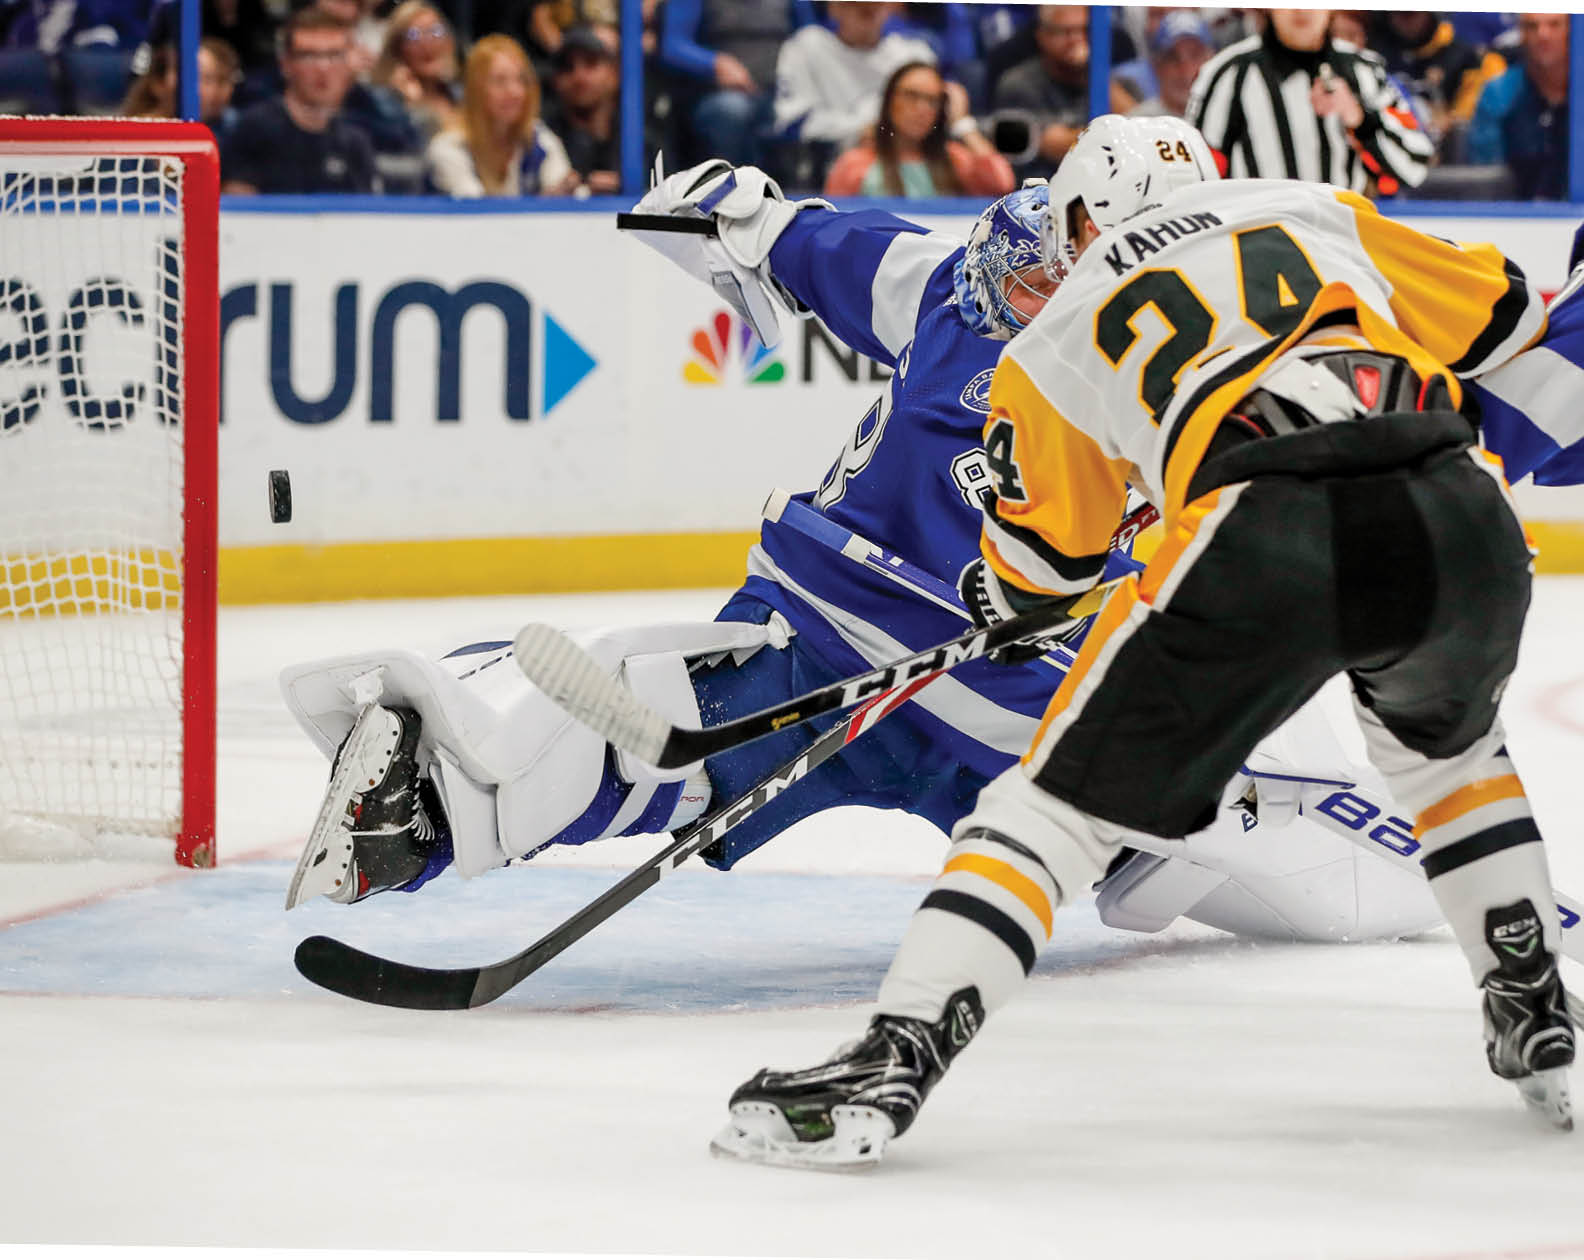 TAMPA, FL - OCTOBER 23: Tampa Bay Lightning goaltender Andrei Vasilevskiy (88) makes a save on a shot from Pittsburgh Penguins center Dominik Kahun (24) in the 1st period of the NHL game between the Pittsburgh Penguins and Tampa Bay Lightning on October 23, 2019 at Amalie Arena in Tampa, FL  (Photo by Mark LoMoglio Icon Sportswire via Getty Images)